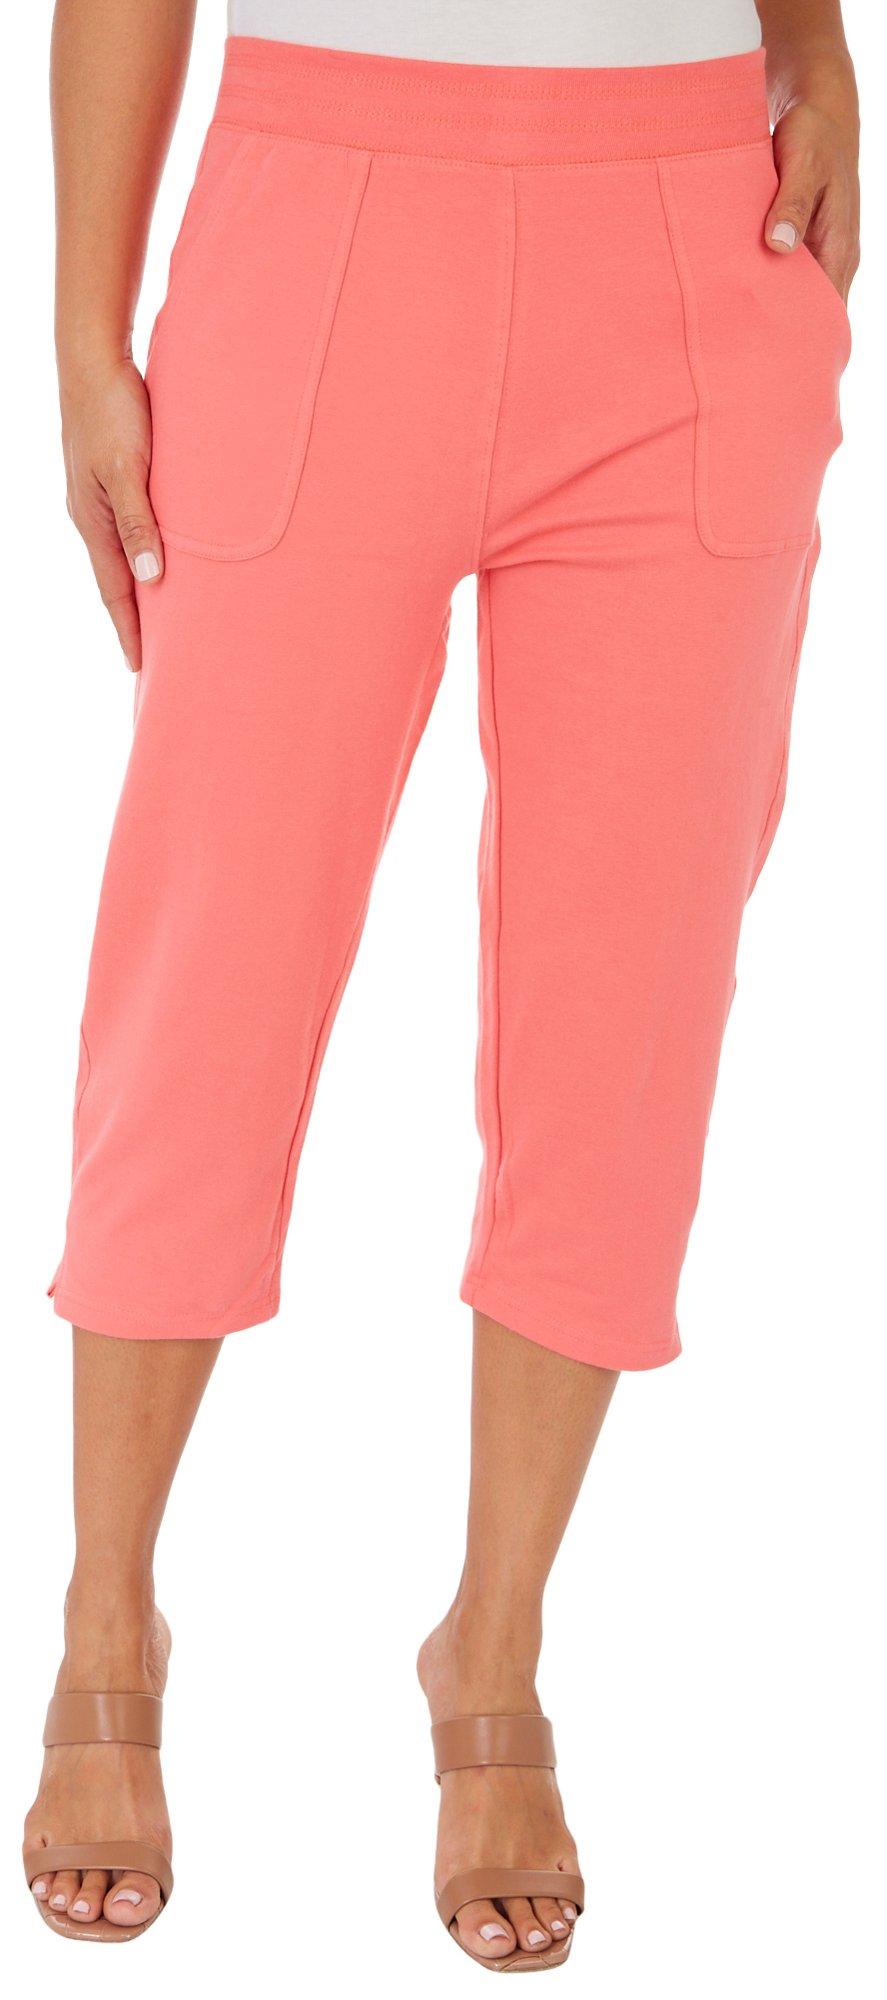 Coral Bay Womens 21 in. Solid French Terry Capris